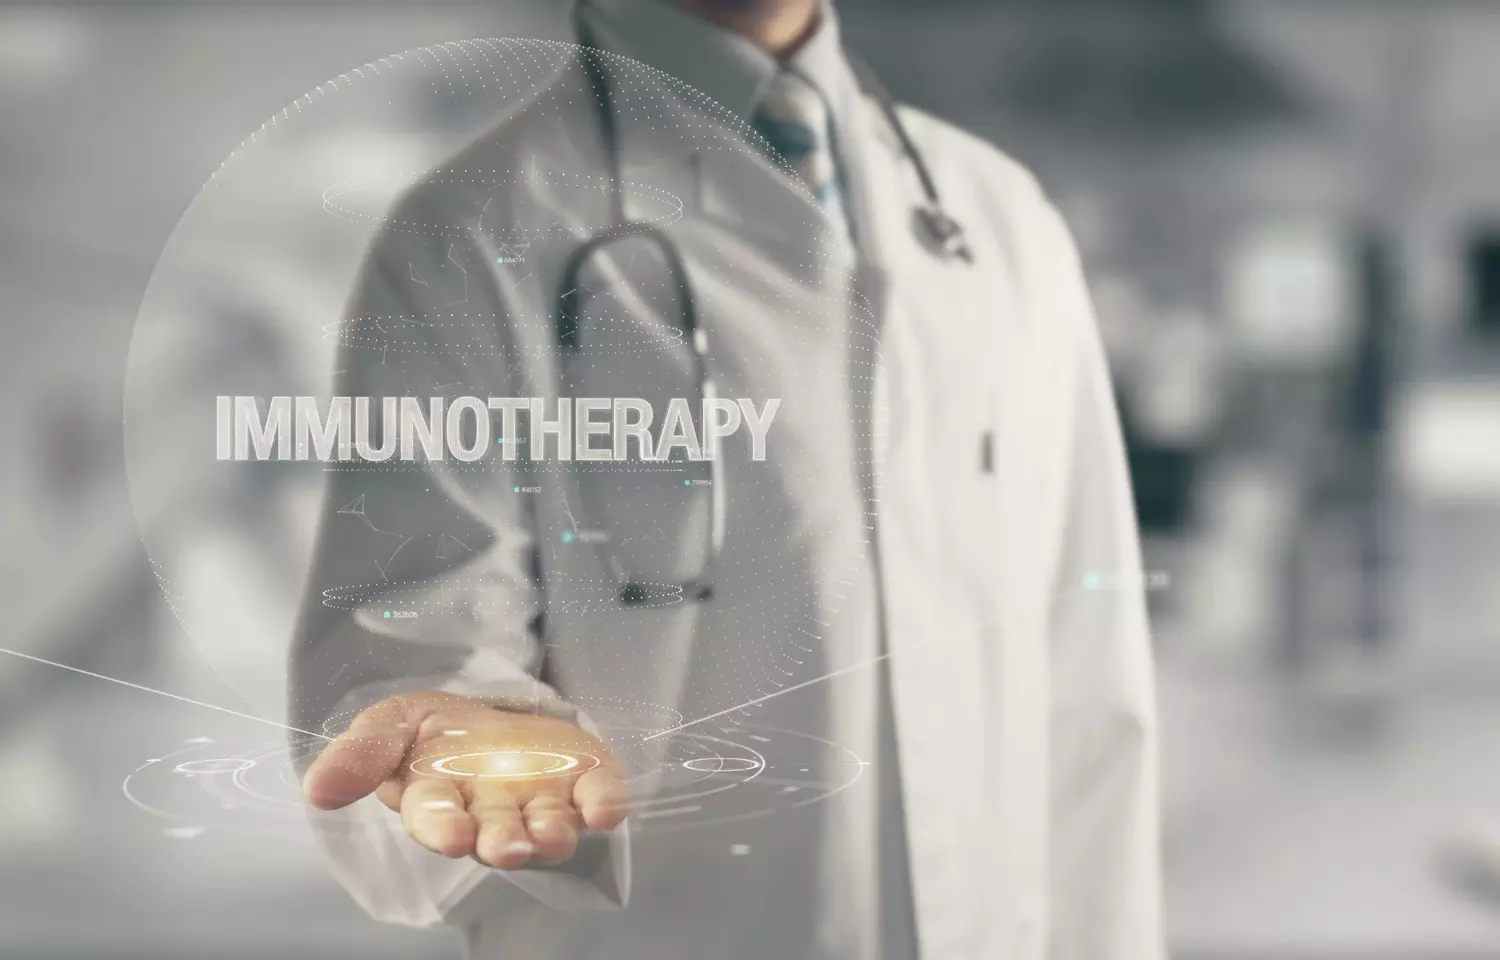 Ultrasound-guided microbubbles boost immunotherapy efficacy